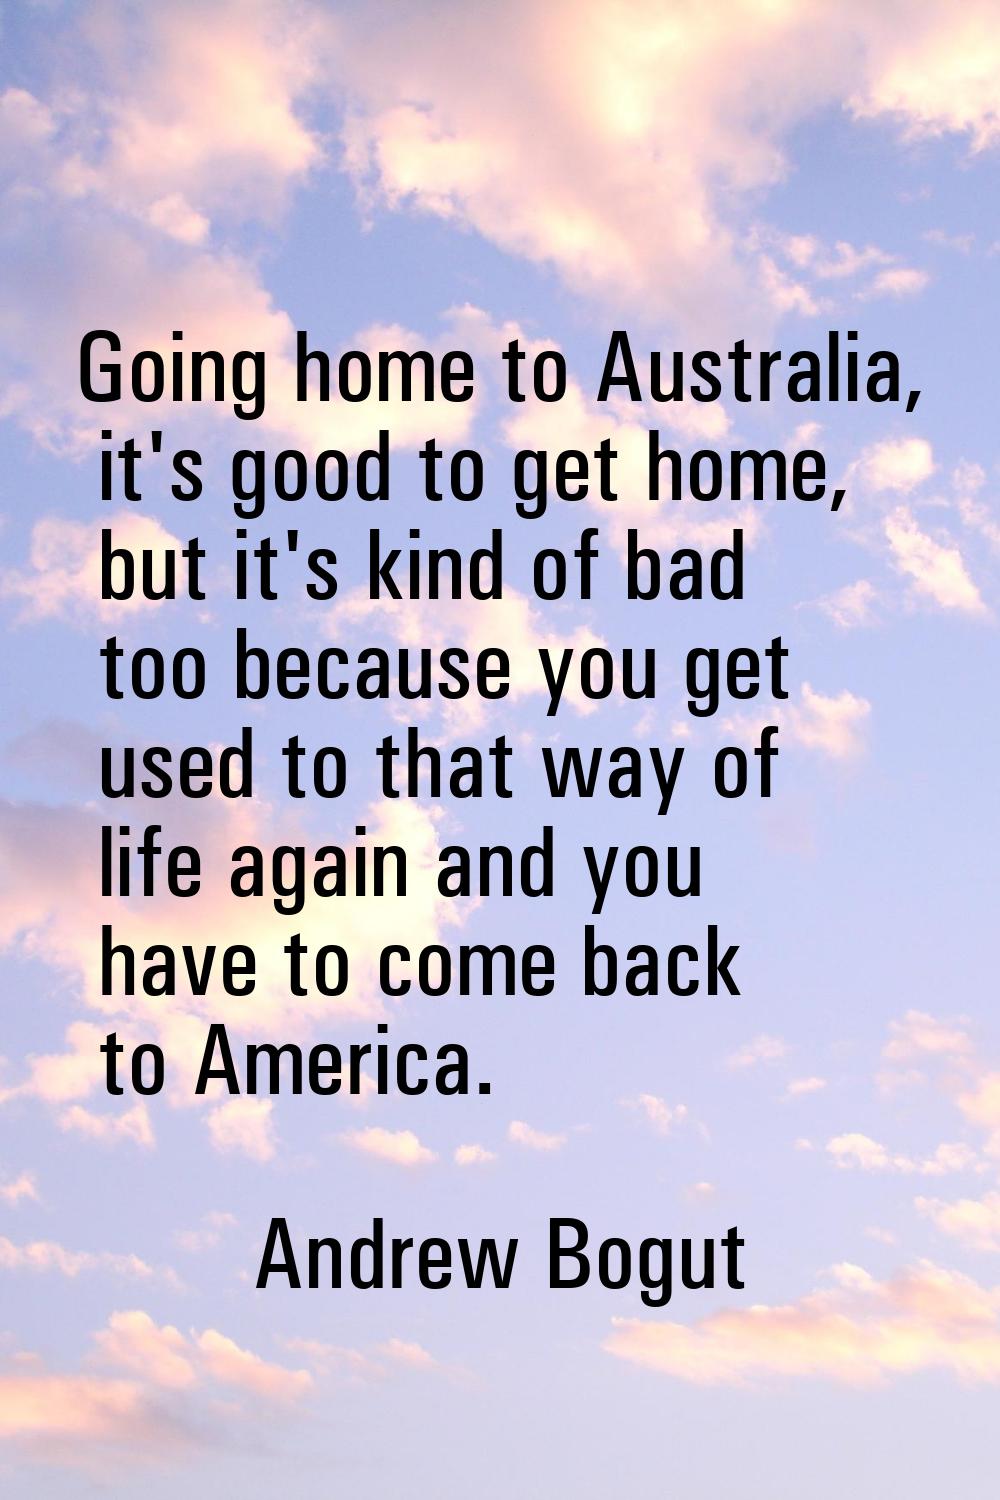 Going home to Australia, it's good to get home, but it's kind of bad too because you get used to th